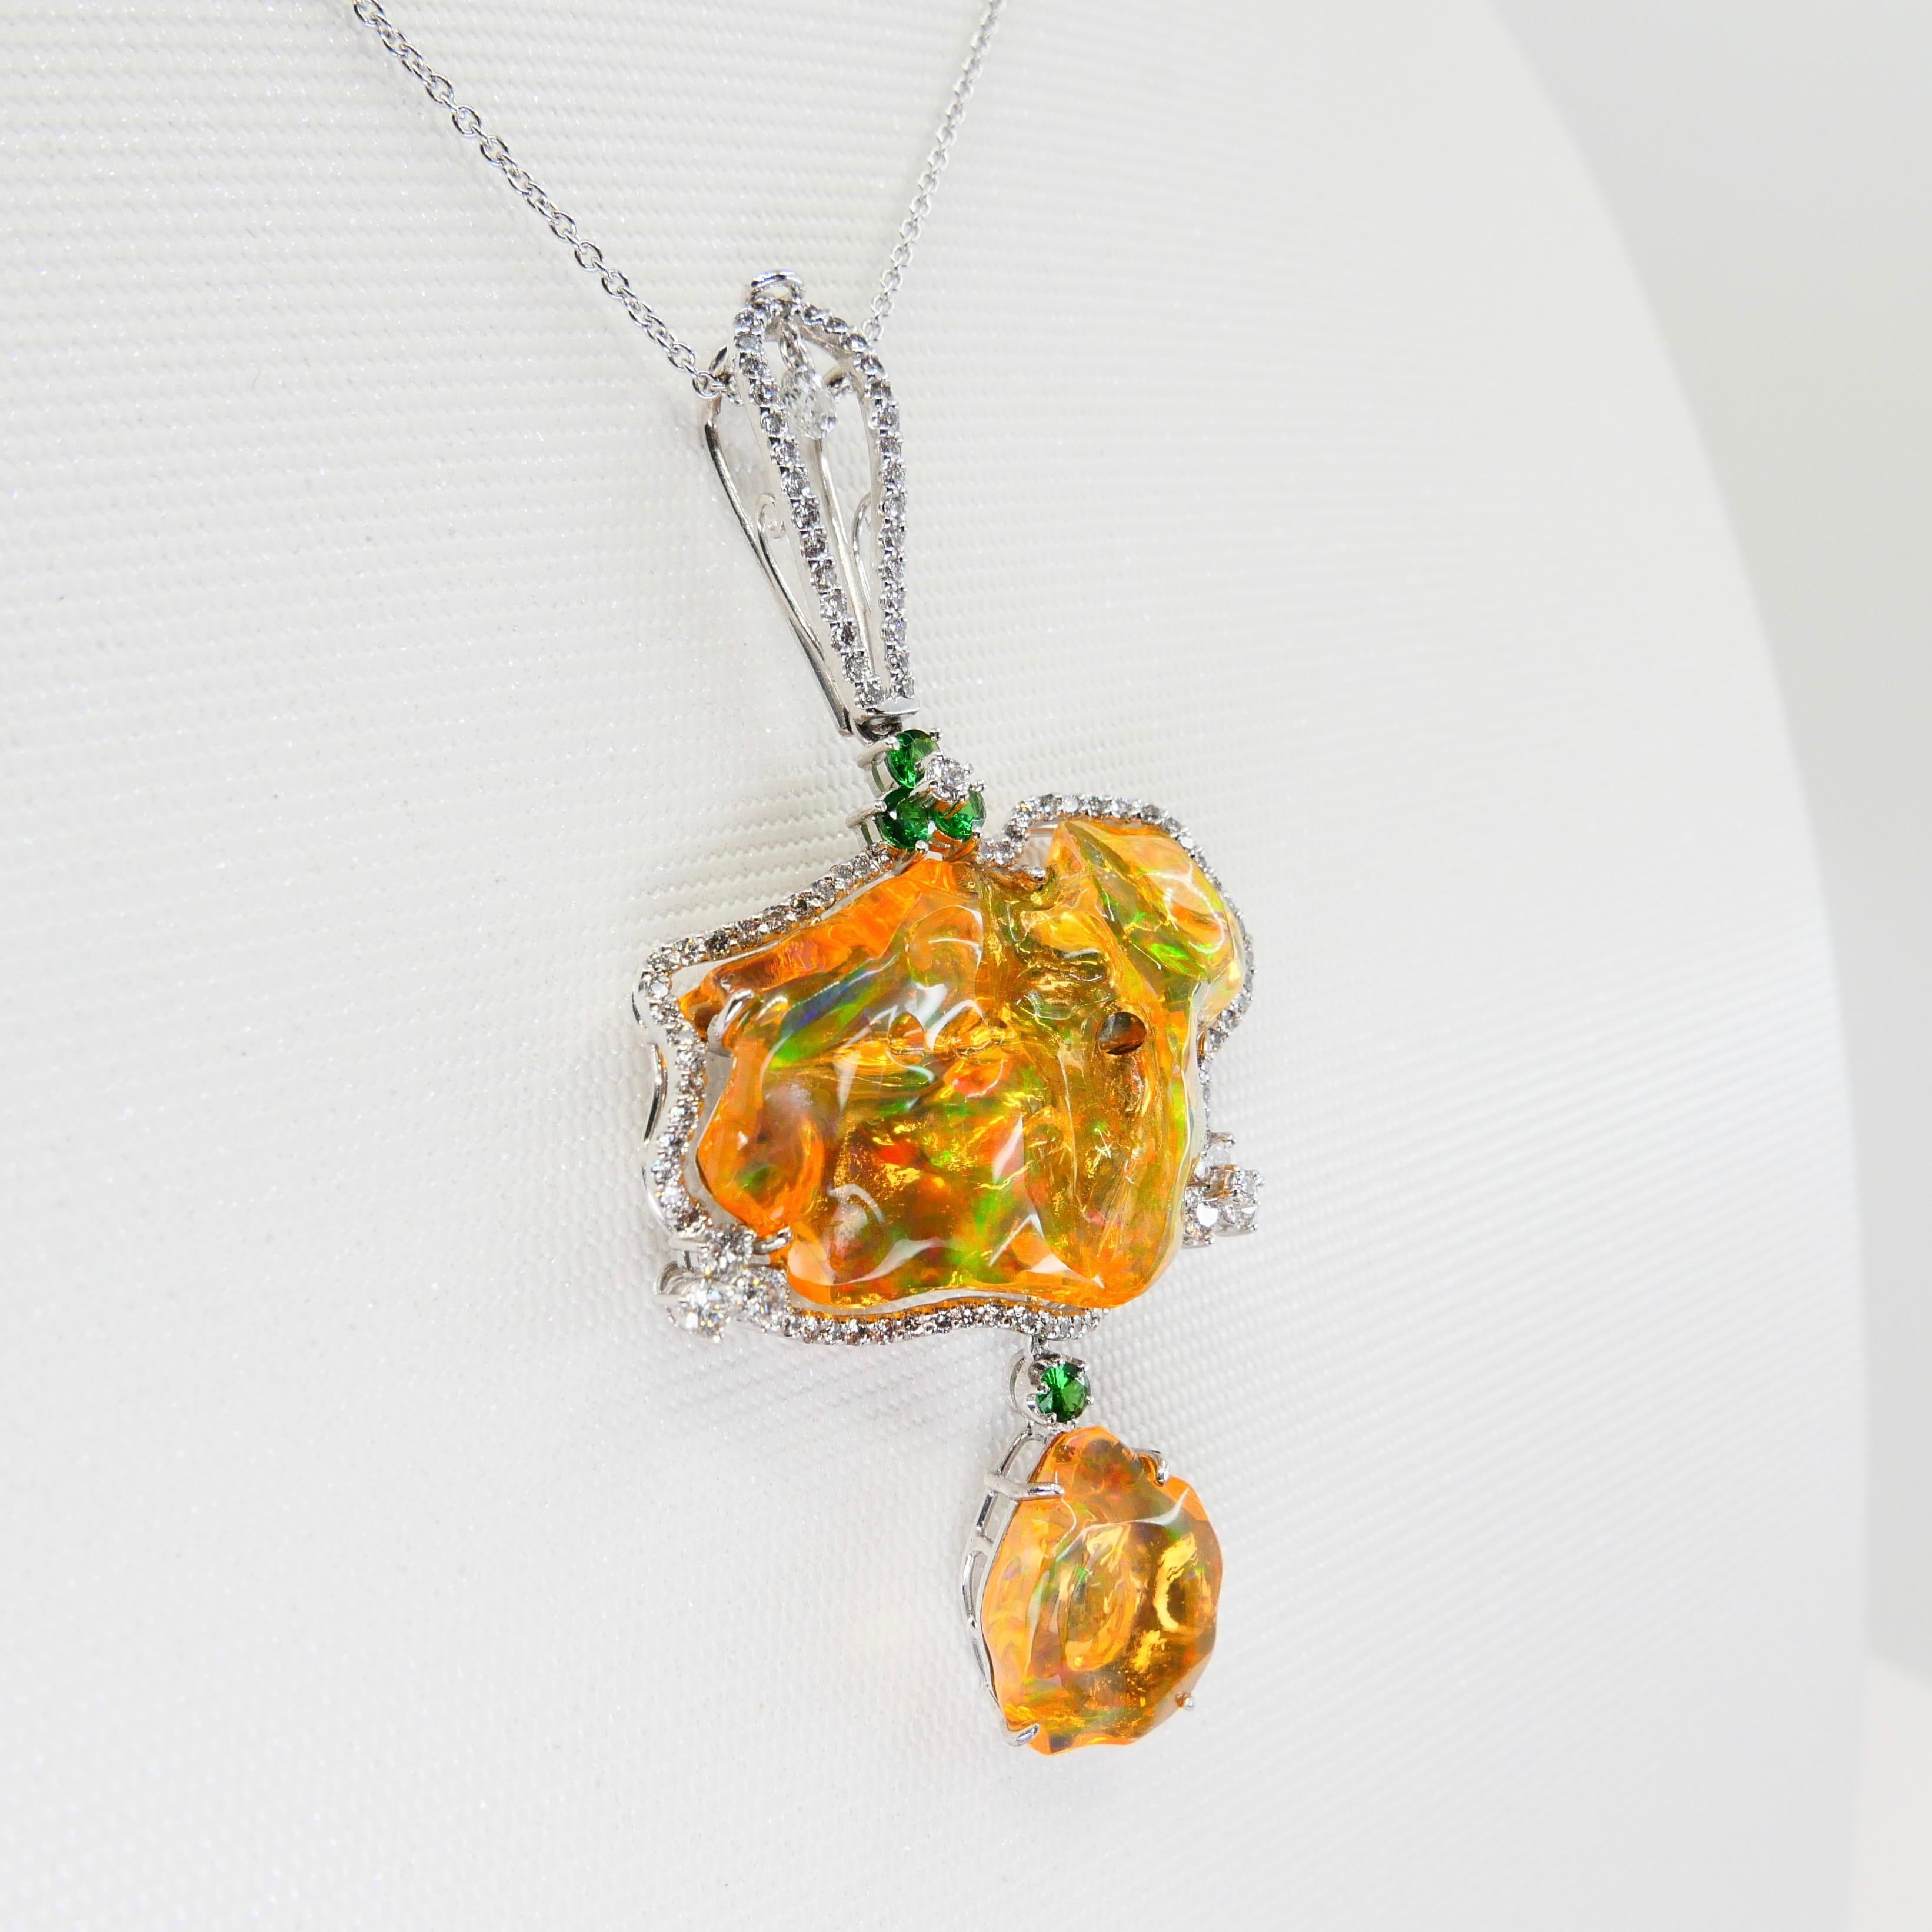 Certified Mexican Fire Opal, Tsavorites, & Diamond Pendant, Superb Play of Color For Sale 1